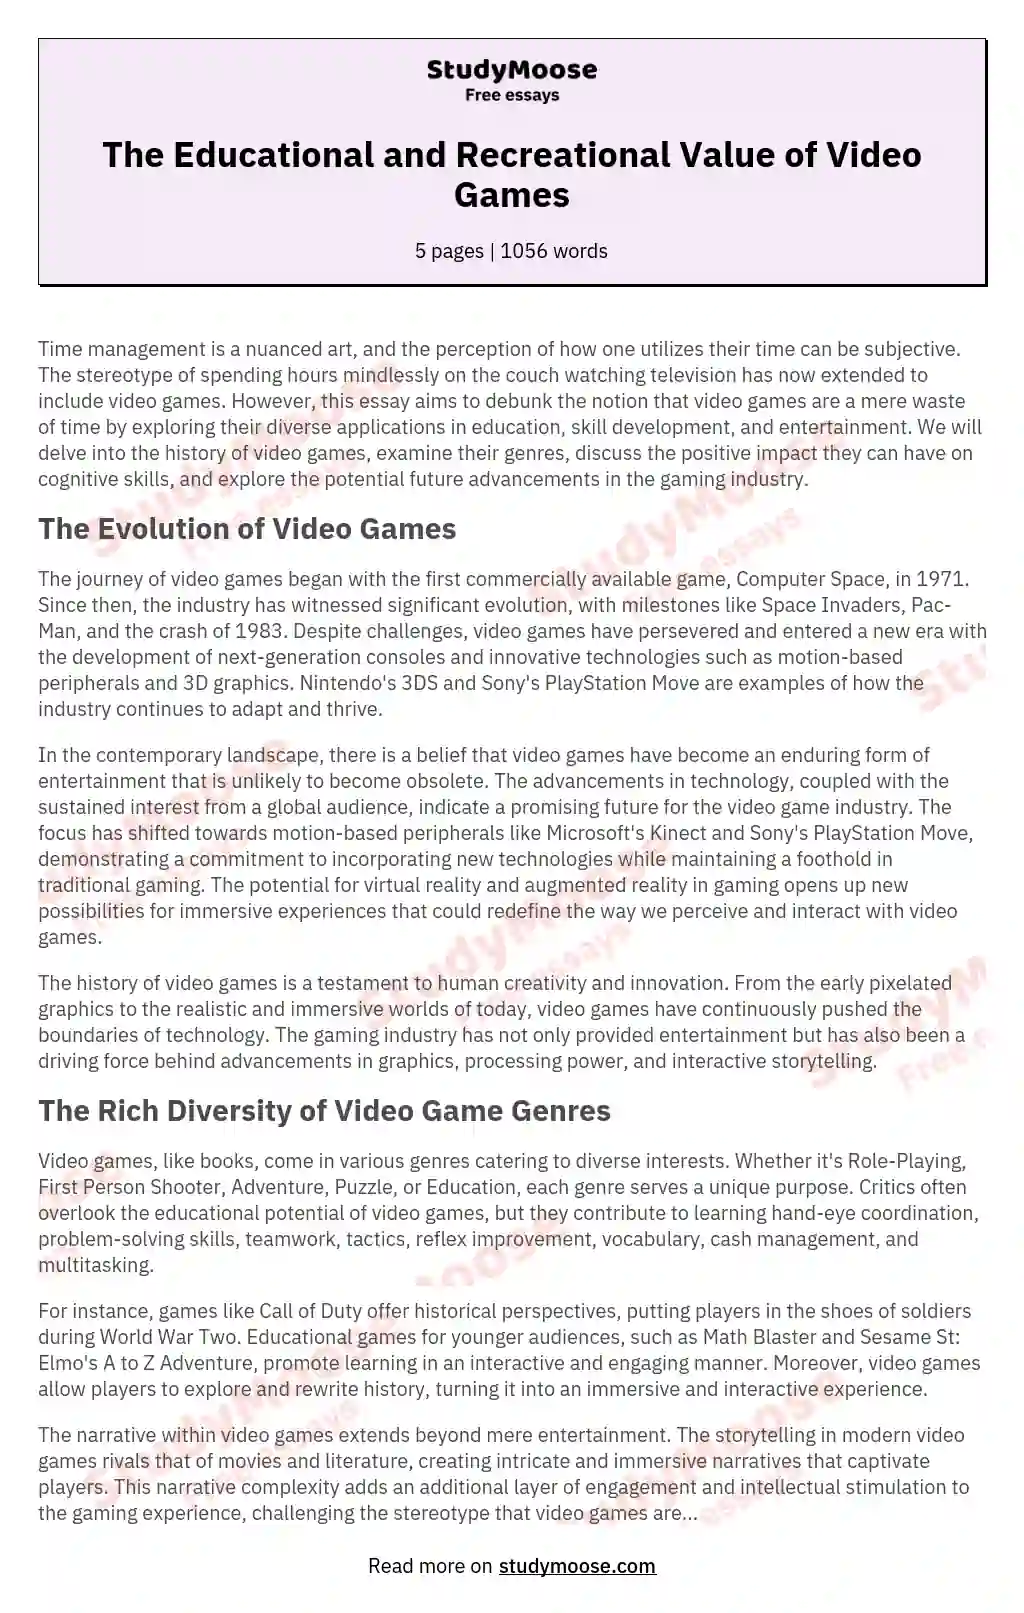 The Educational and Recreational Value of Video Games essay